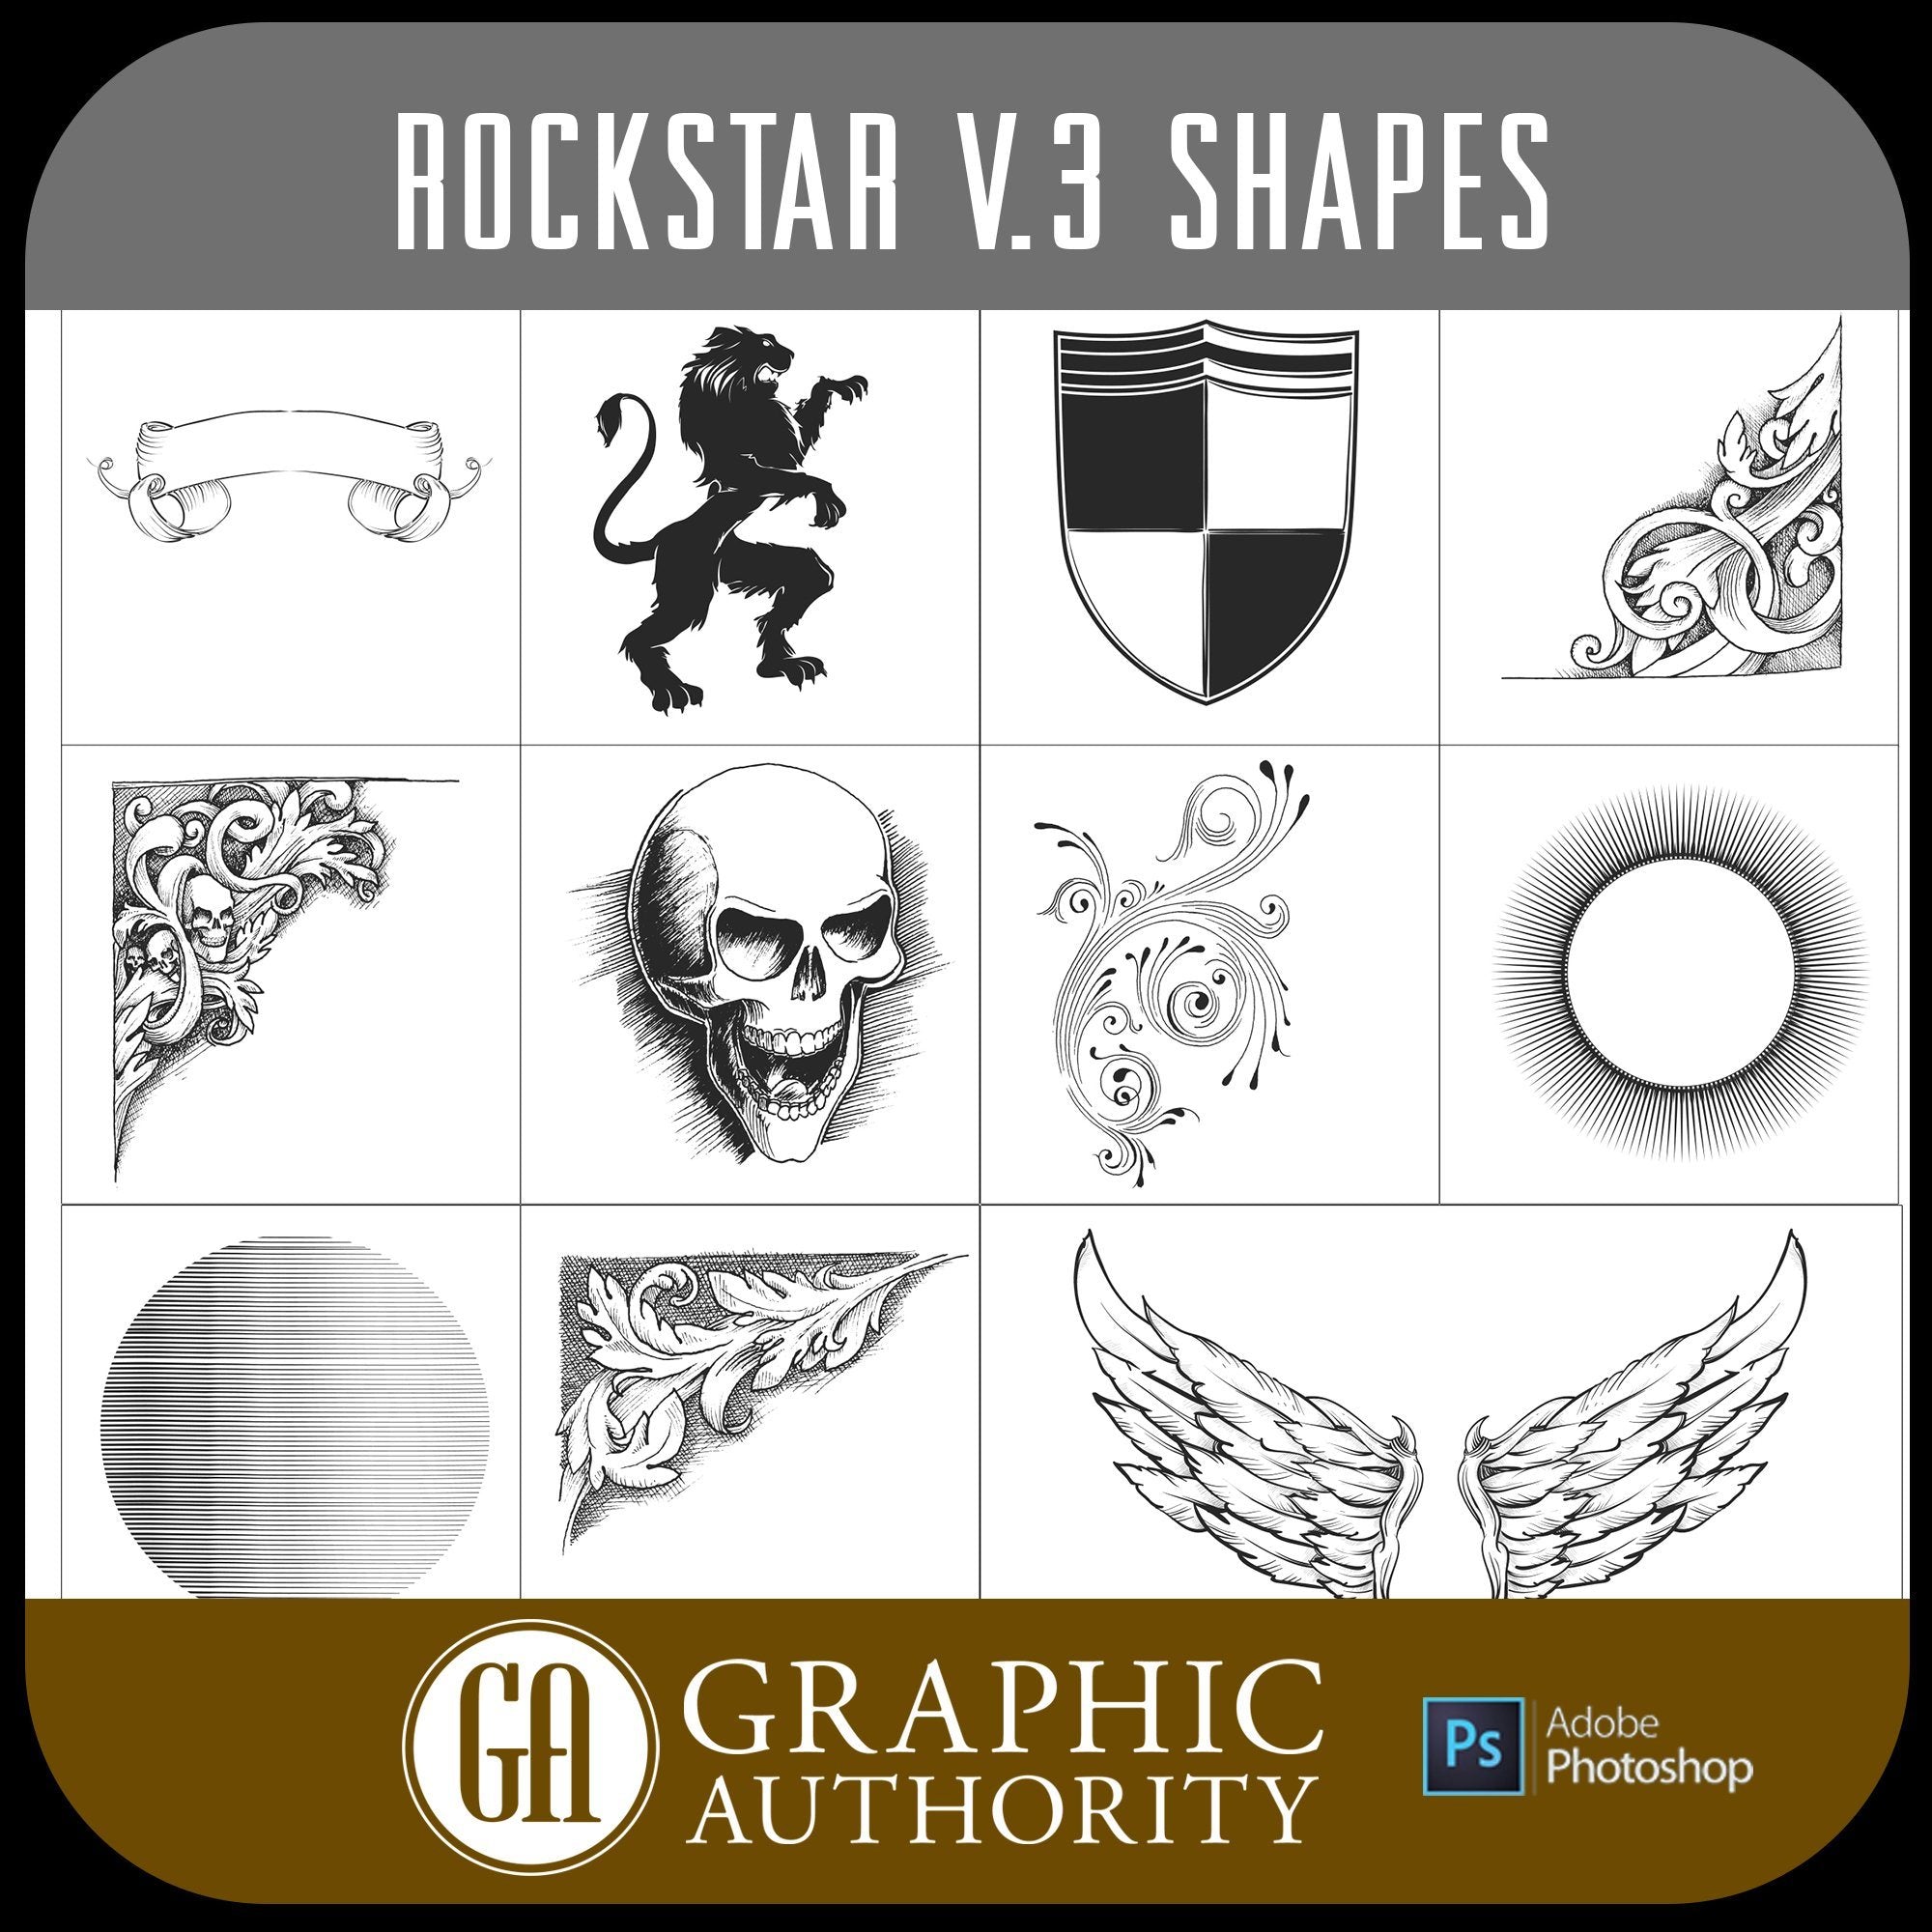 Rockstar v.3 - Vector .CHS Photoshop Shapes-Photoshop Template - Graphic Authority